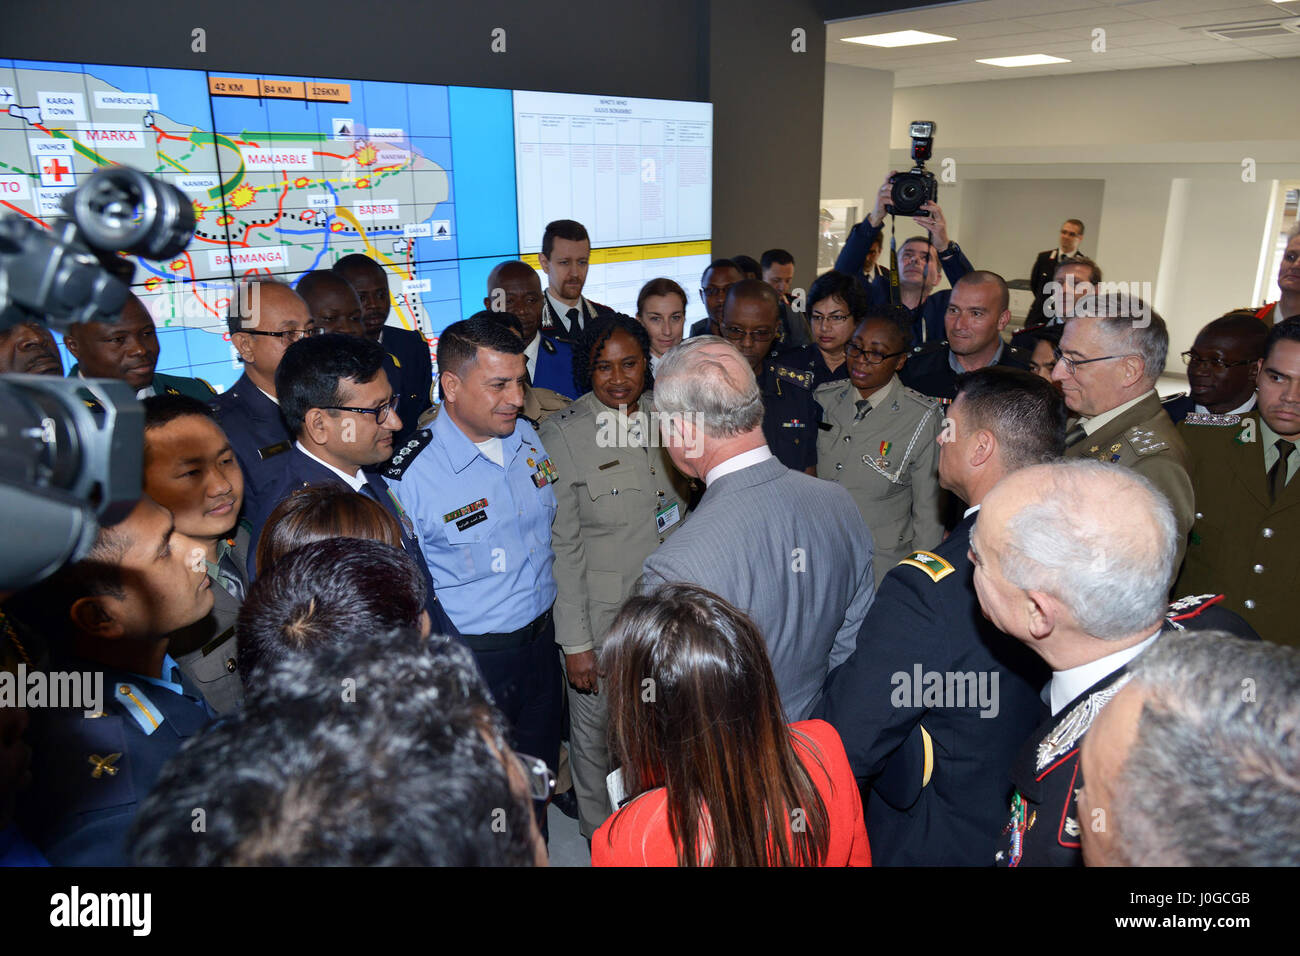 The Royal Highness, Prince Charles, Prince of Wales, meets students from Europe, Africa, Italy and the U.S., during visit at Center of Excellence for Stability Police Units (CoESPU) Vicenza, Italy, April 1, 2017. (U.S. Army Photo by Visual Information Specialist Antonio Bedin/released) Stock Photo